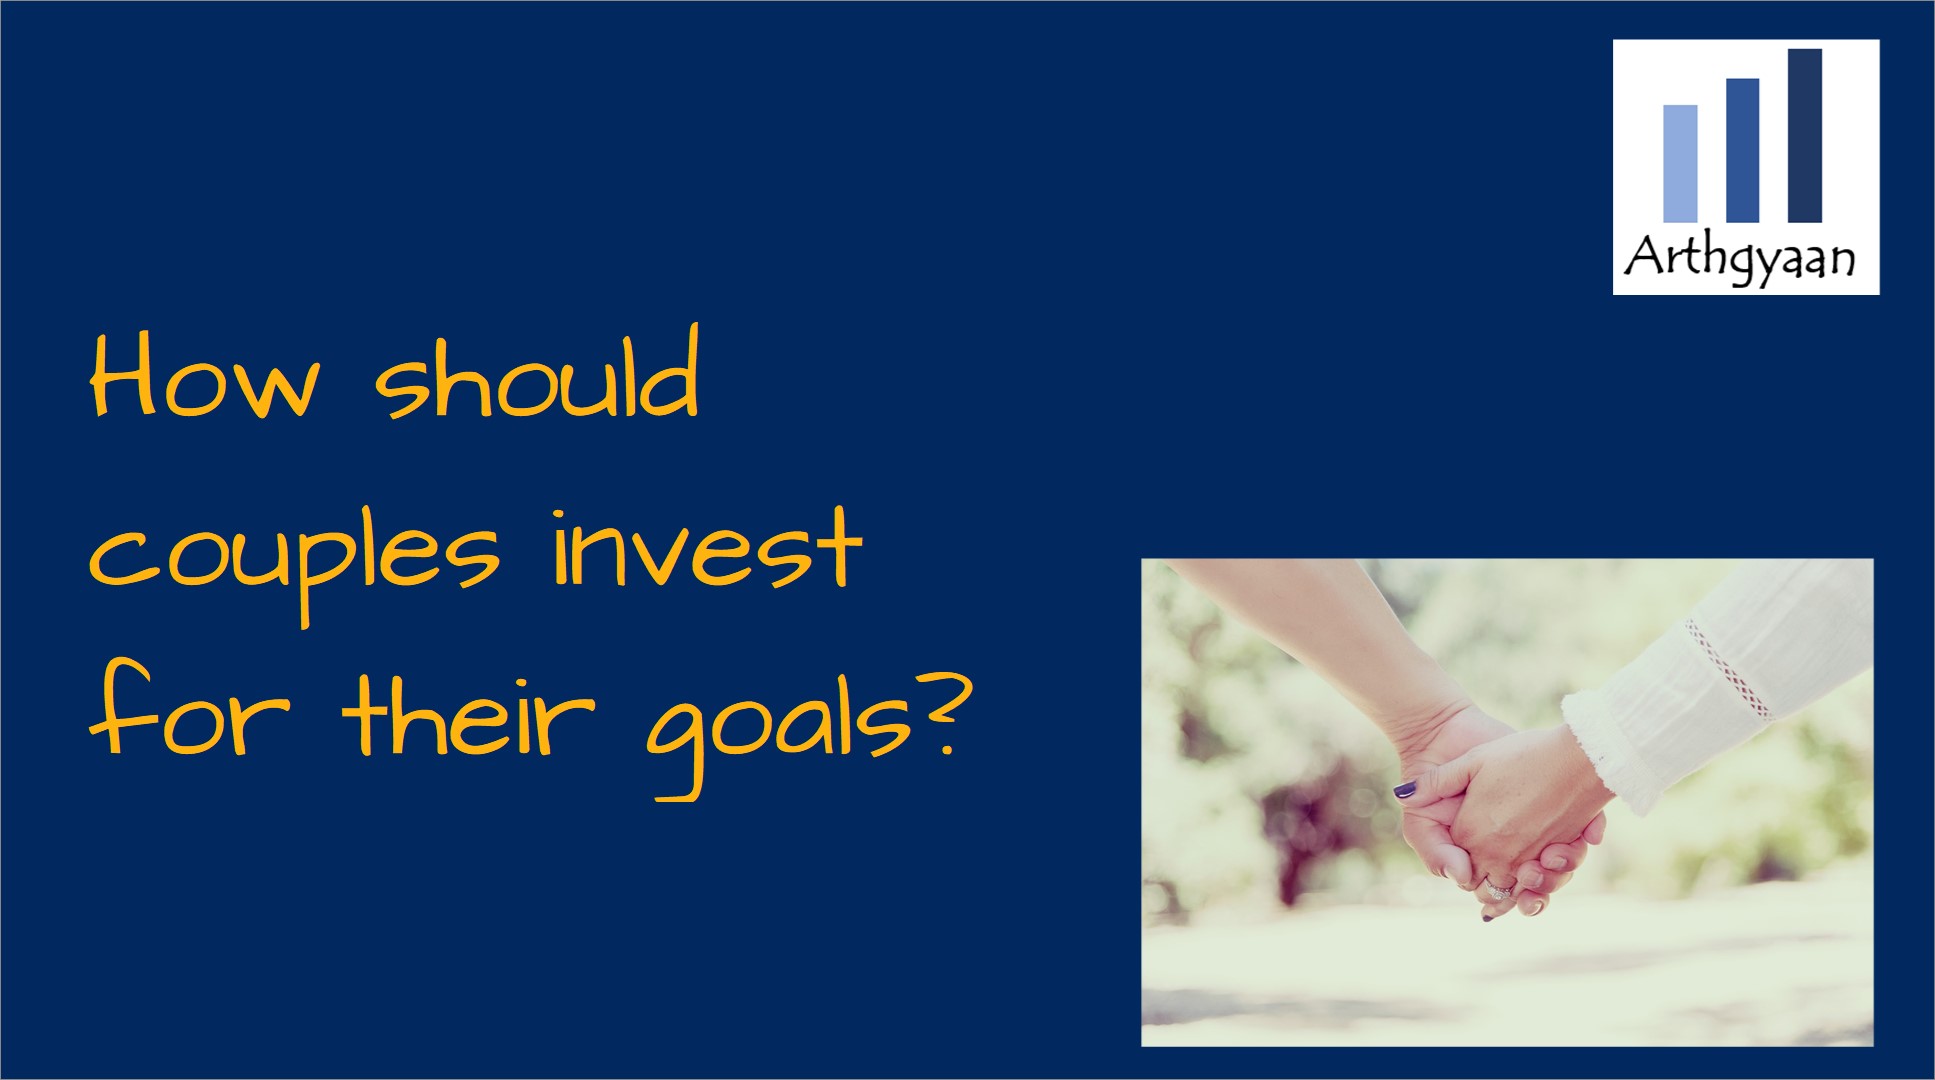 How should couples invest for their goals?